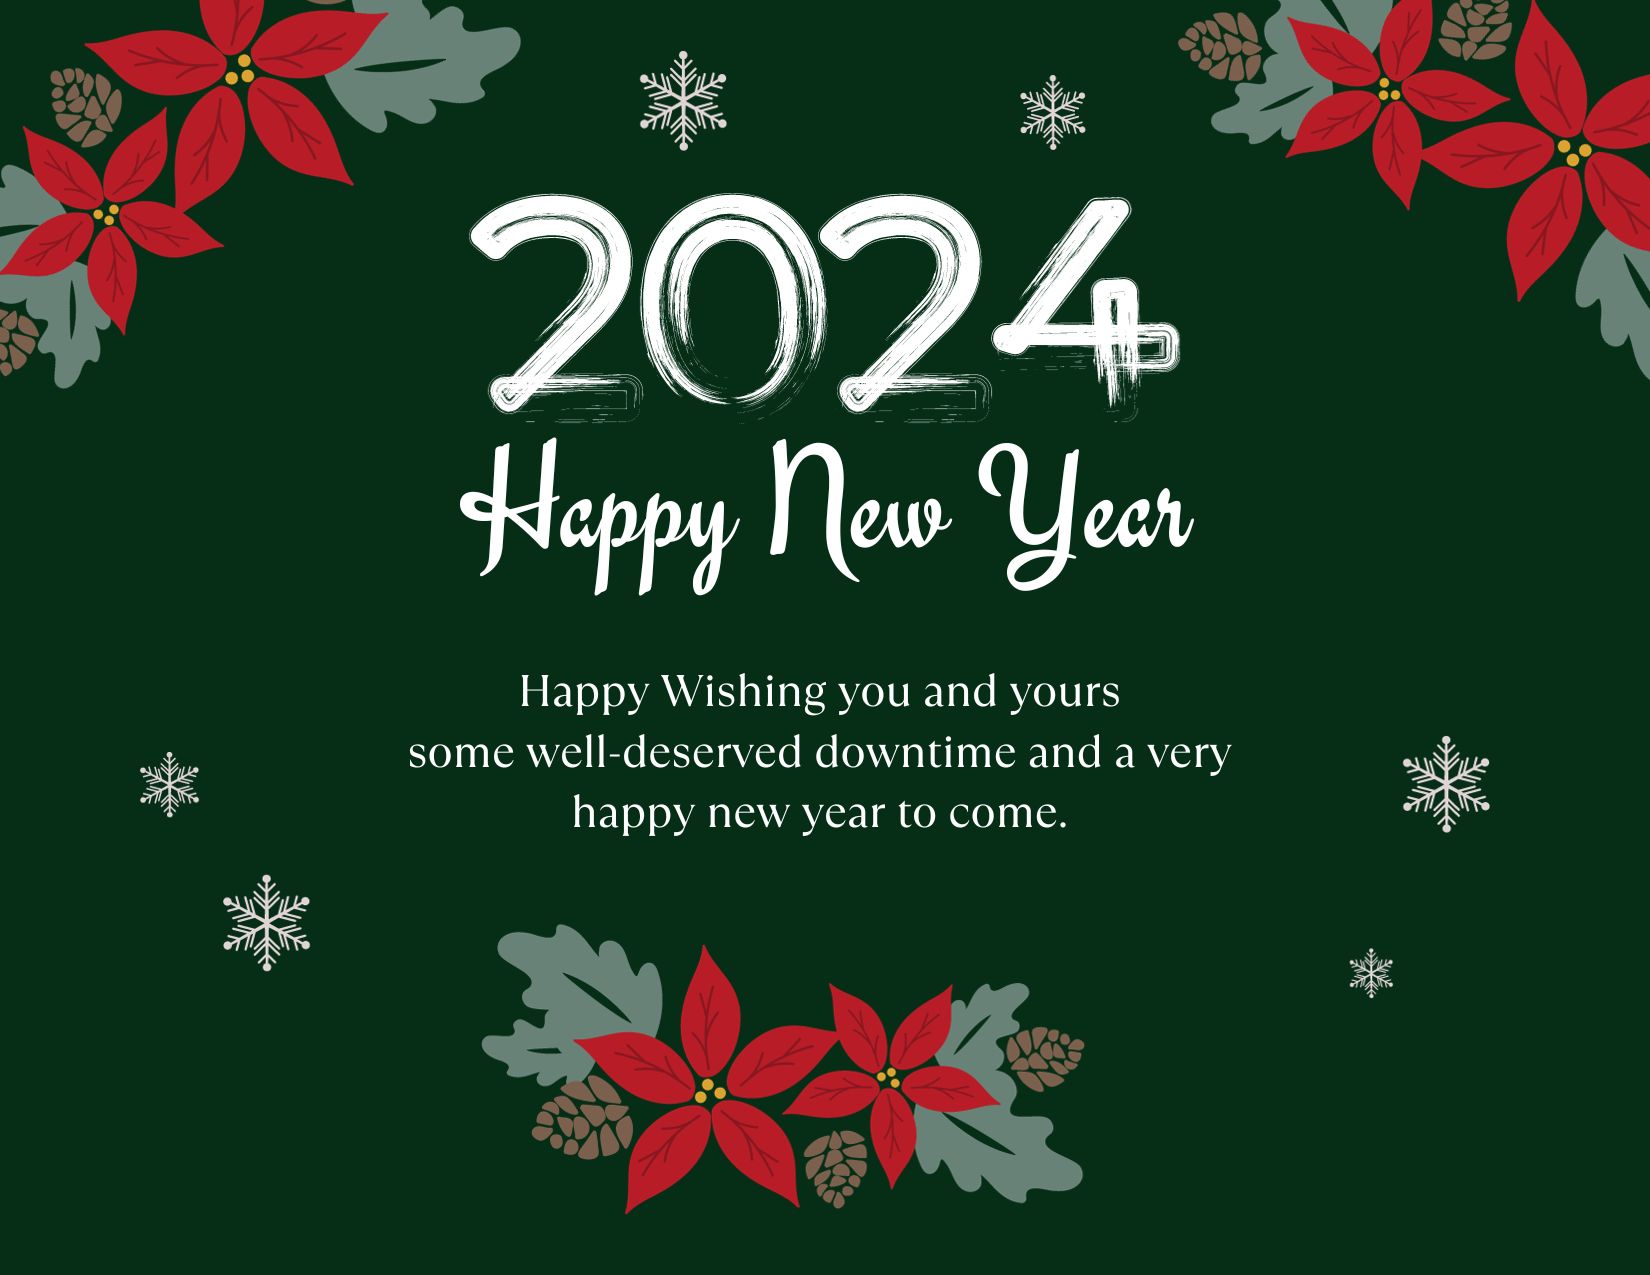 Green Simple Happy New Year 2024 Wishes Note Card ^ Happy Wishing You And Yours Some Well Deserved Downtime And A Very Happy New Year To Come